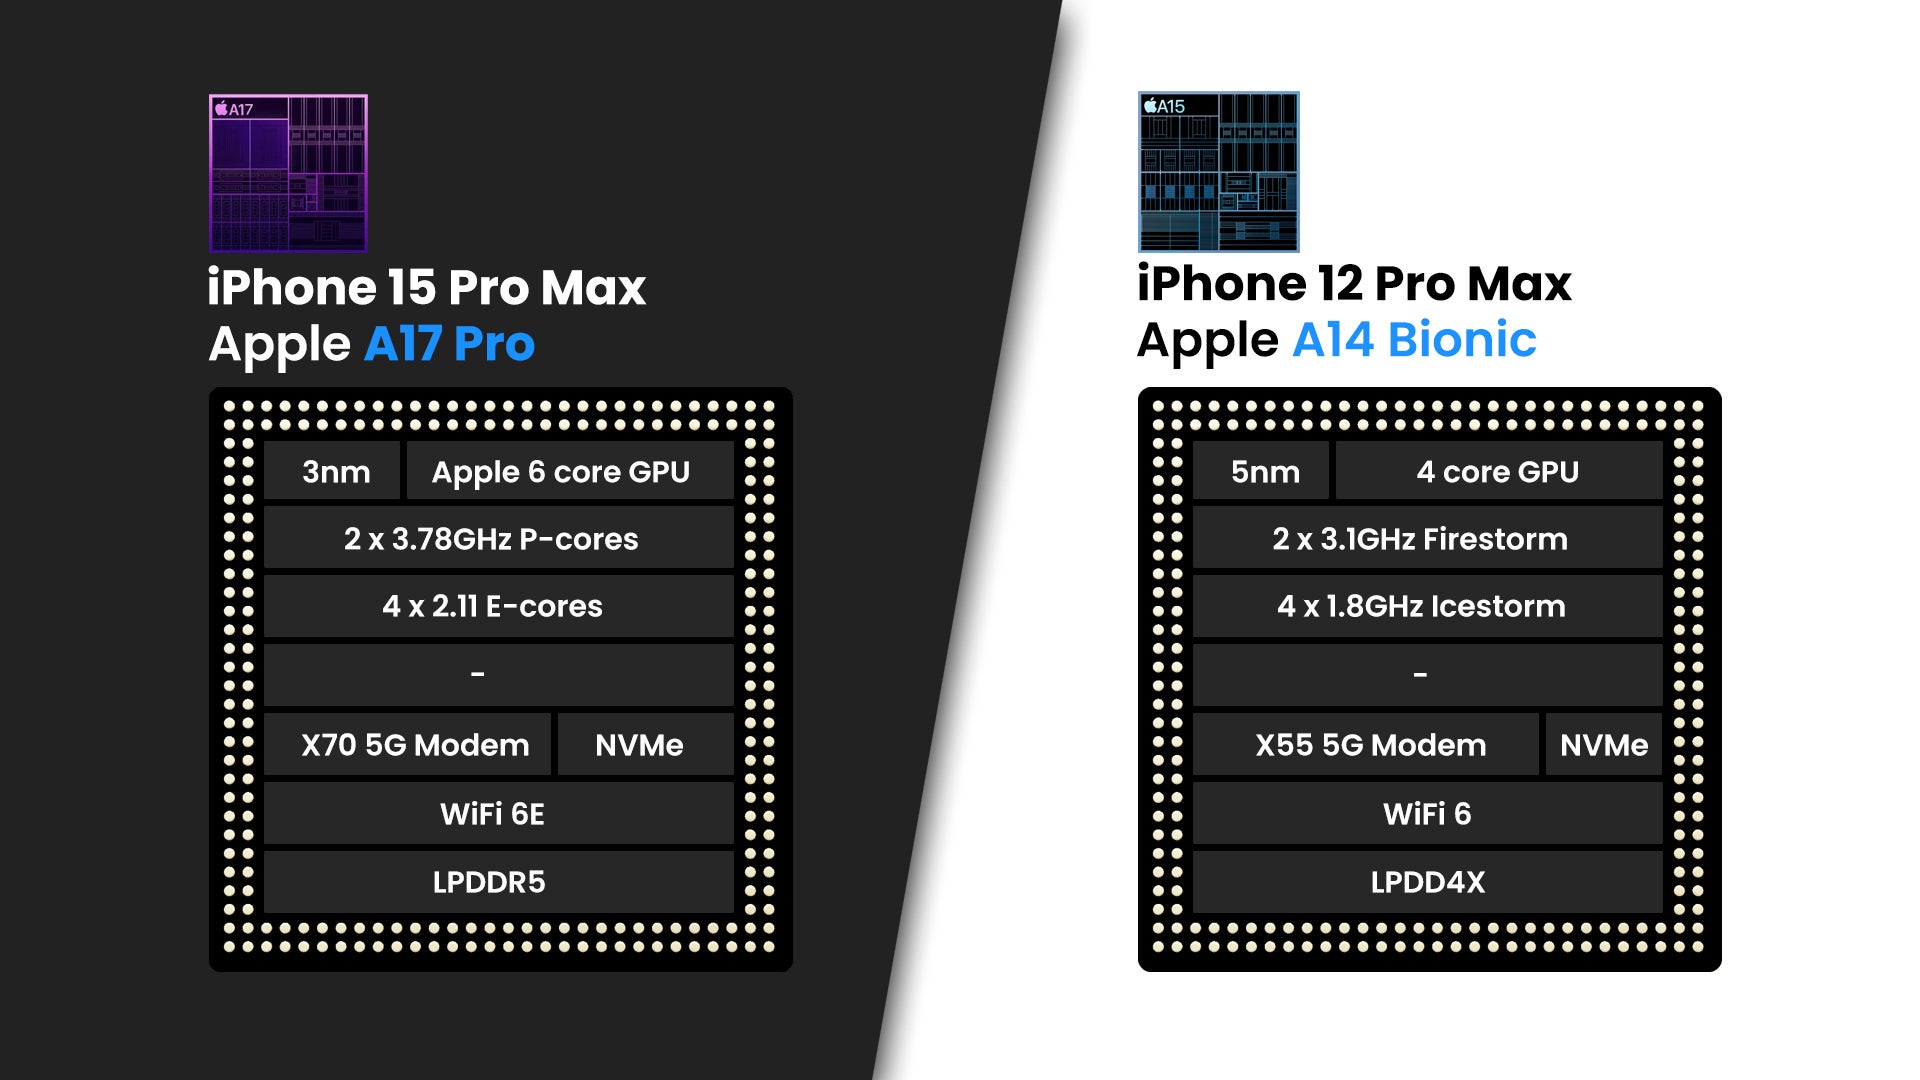 (Image credit - PhoneArena) - iPhone 15 Pro Max vs iPhone 12 Pro Max: is it time for an upgrade?